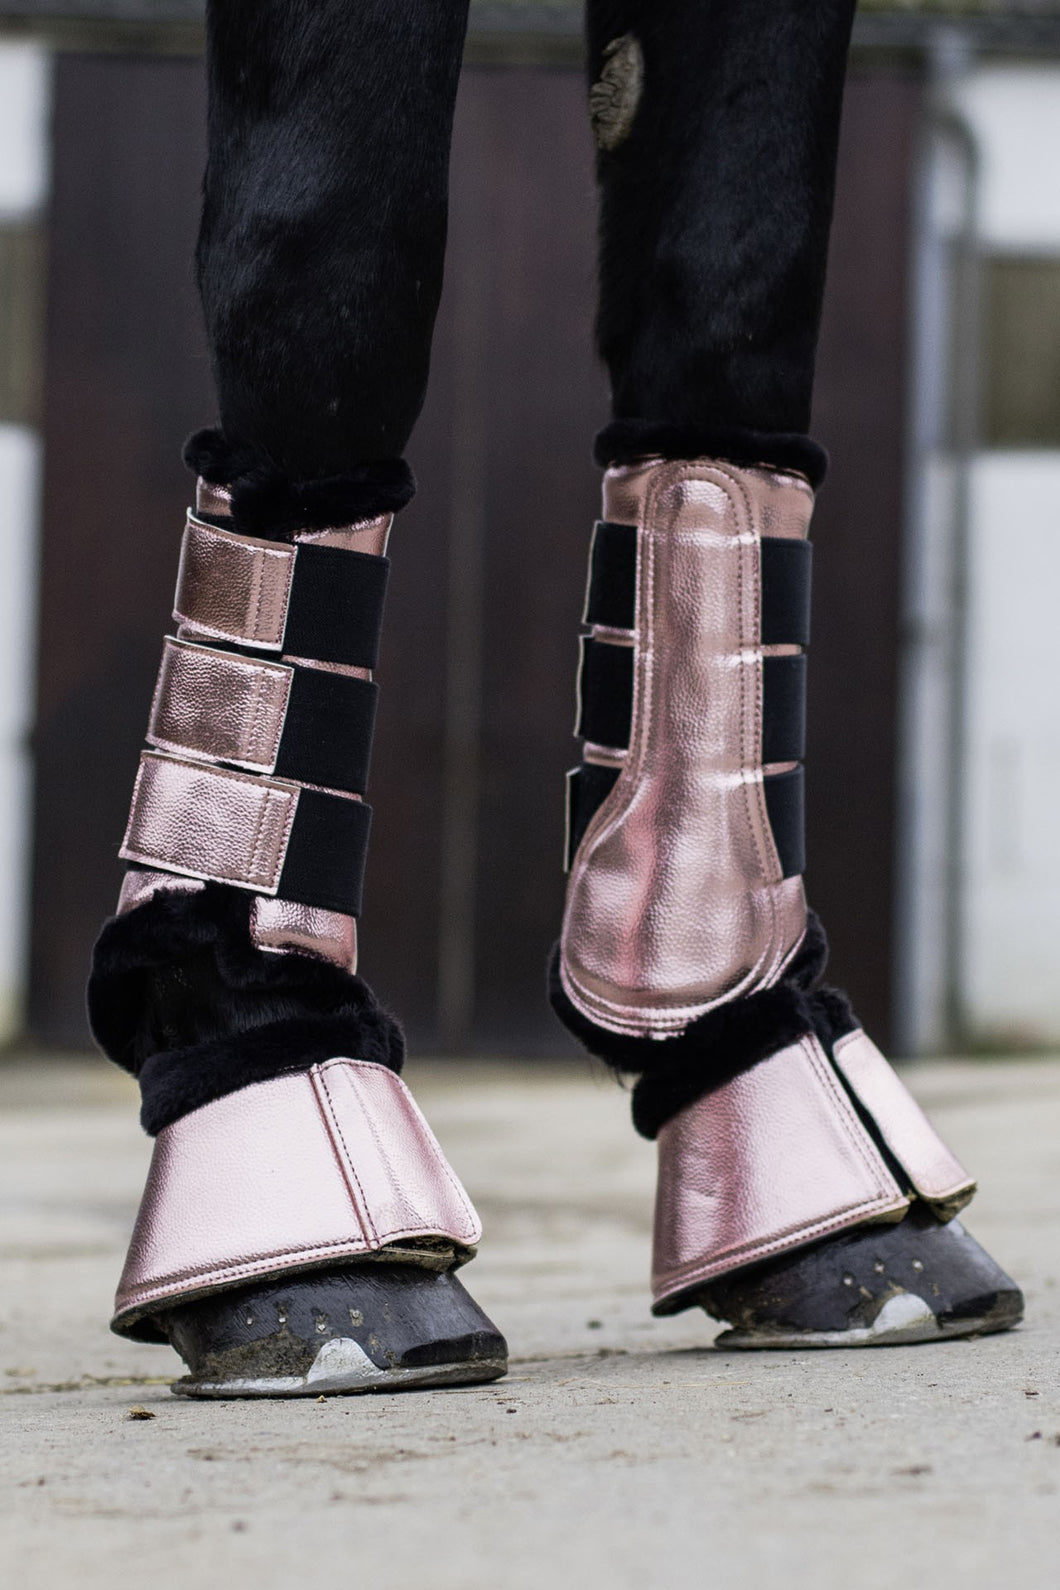 hkm metallic rose gold protection boots